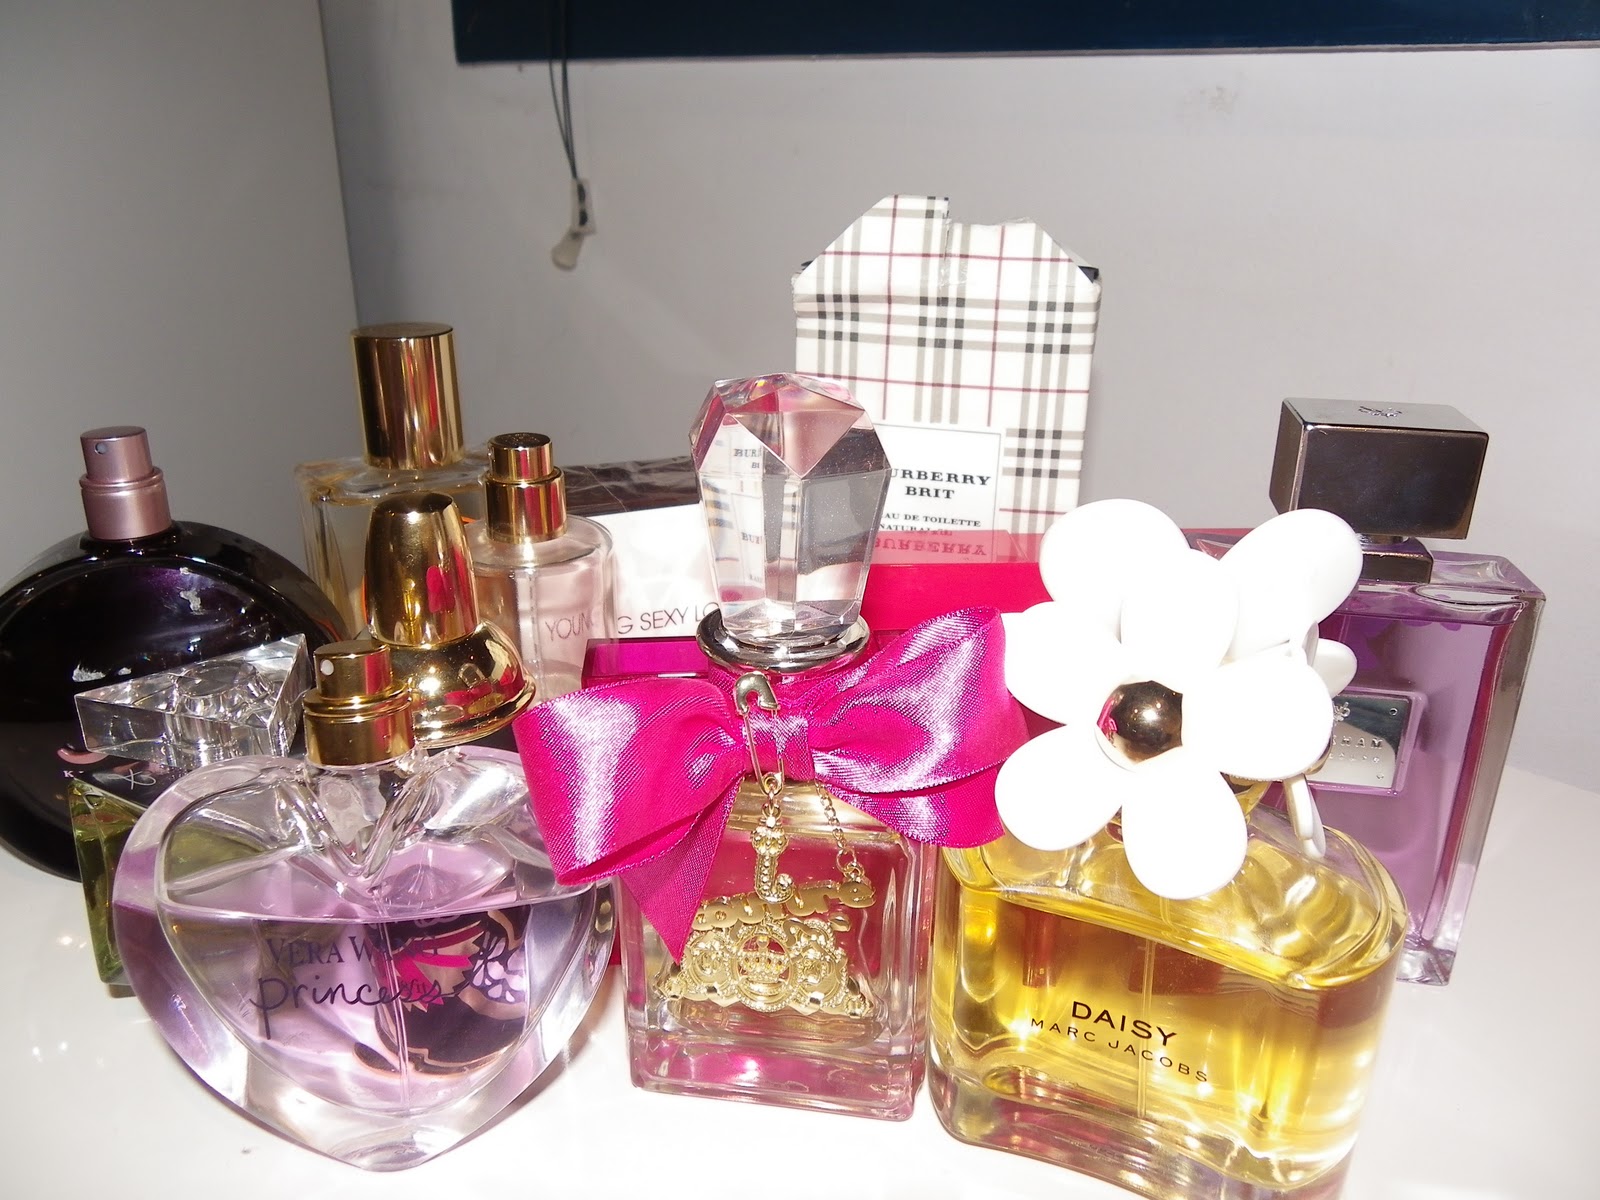 Superficial Sydney: My Perfume Collection